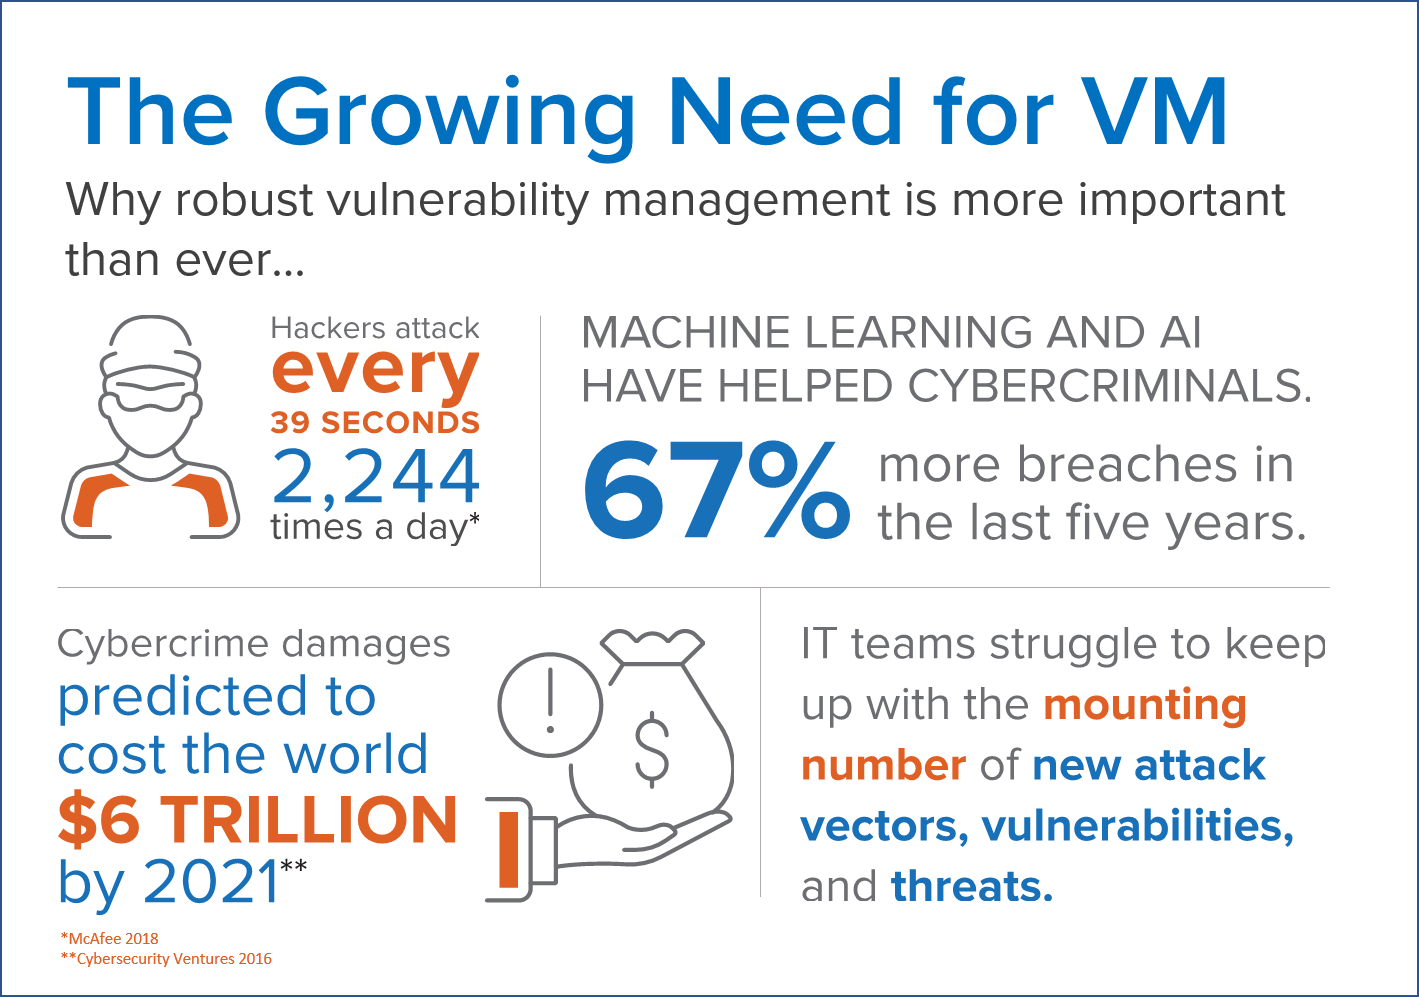 Growing Need for VM infographic